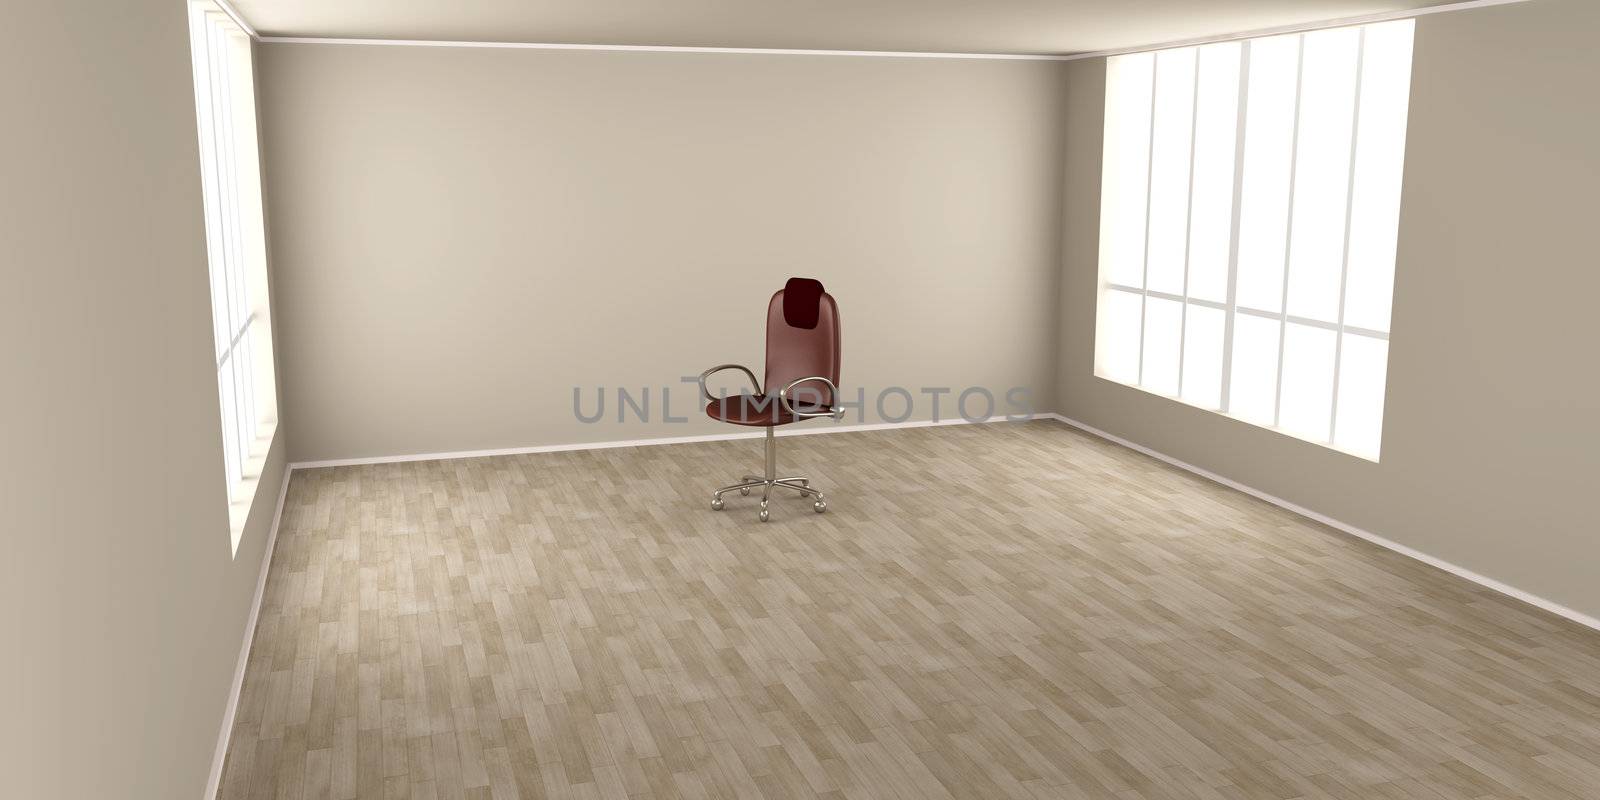 3D rendered Illustration. Office chair in a empty room.